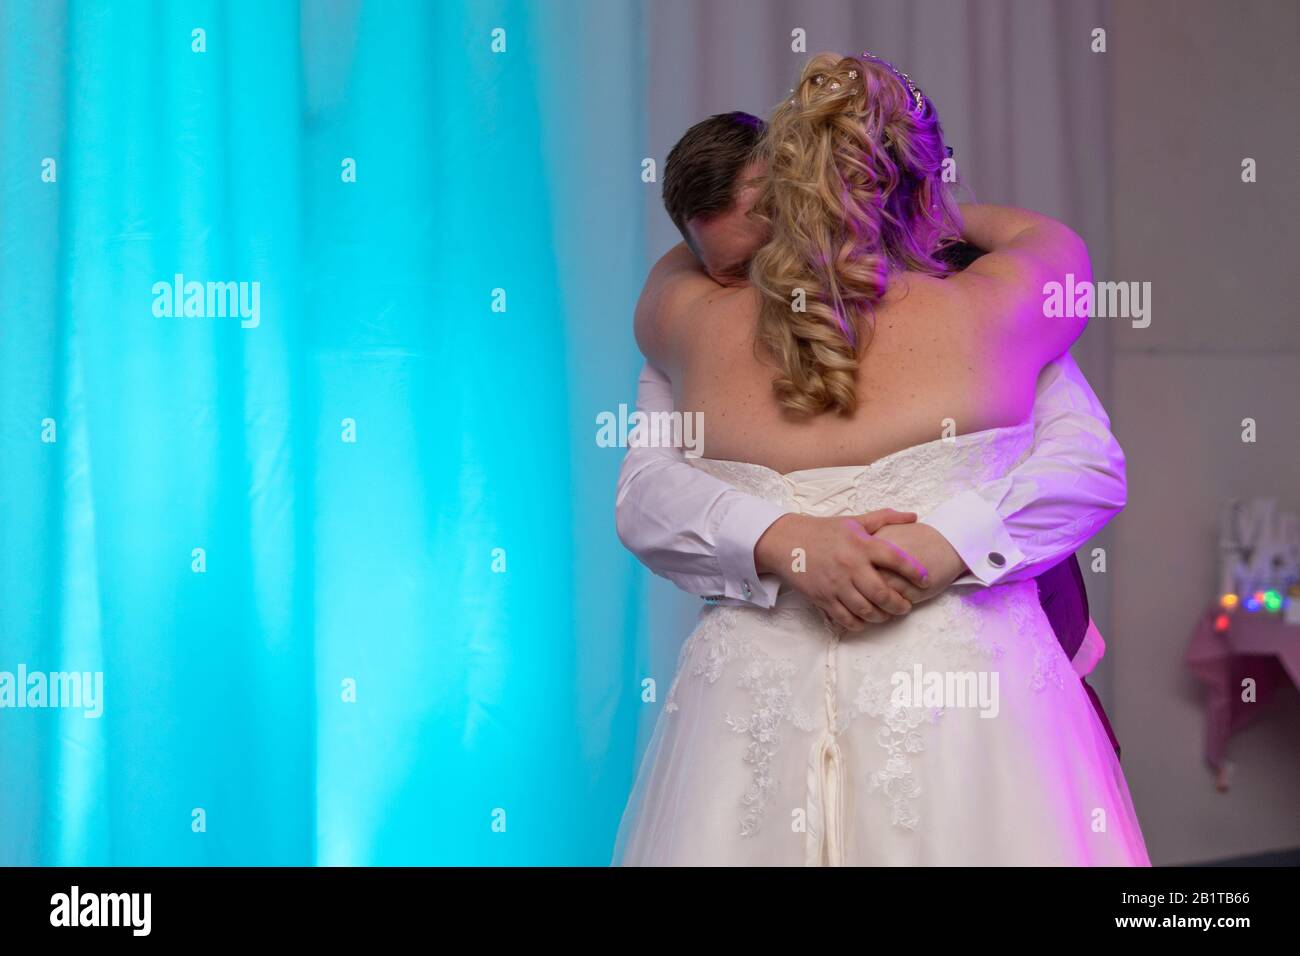 a bride and groom dancing their first dance on their wedding day at their wedding reception Stock Photo